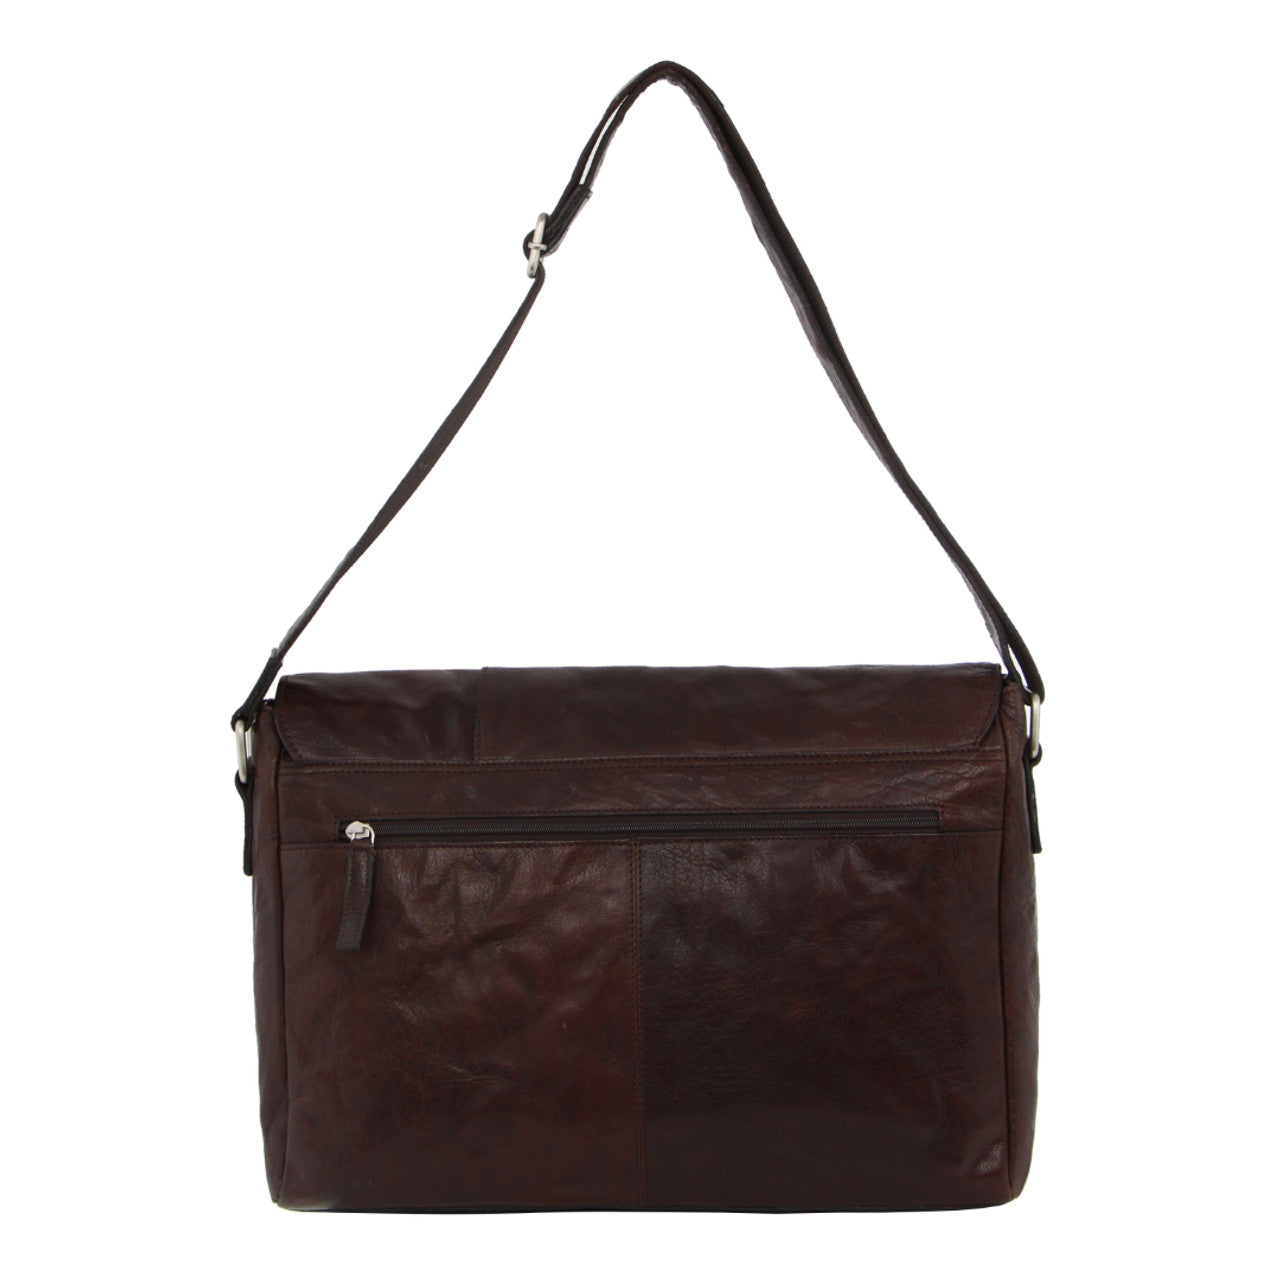 Pierre Cardin Rustic Leather Computer/Messenger Bag with flap closure - 0